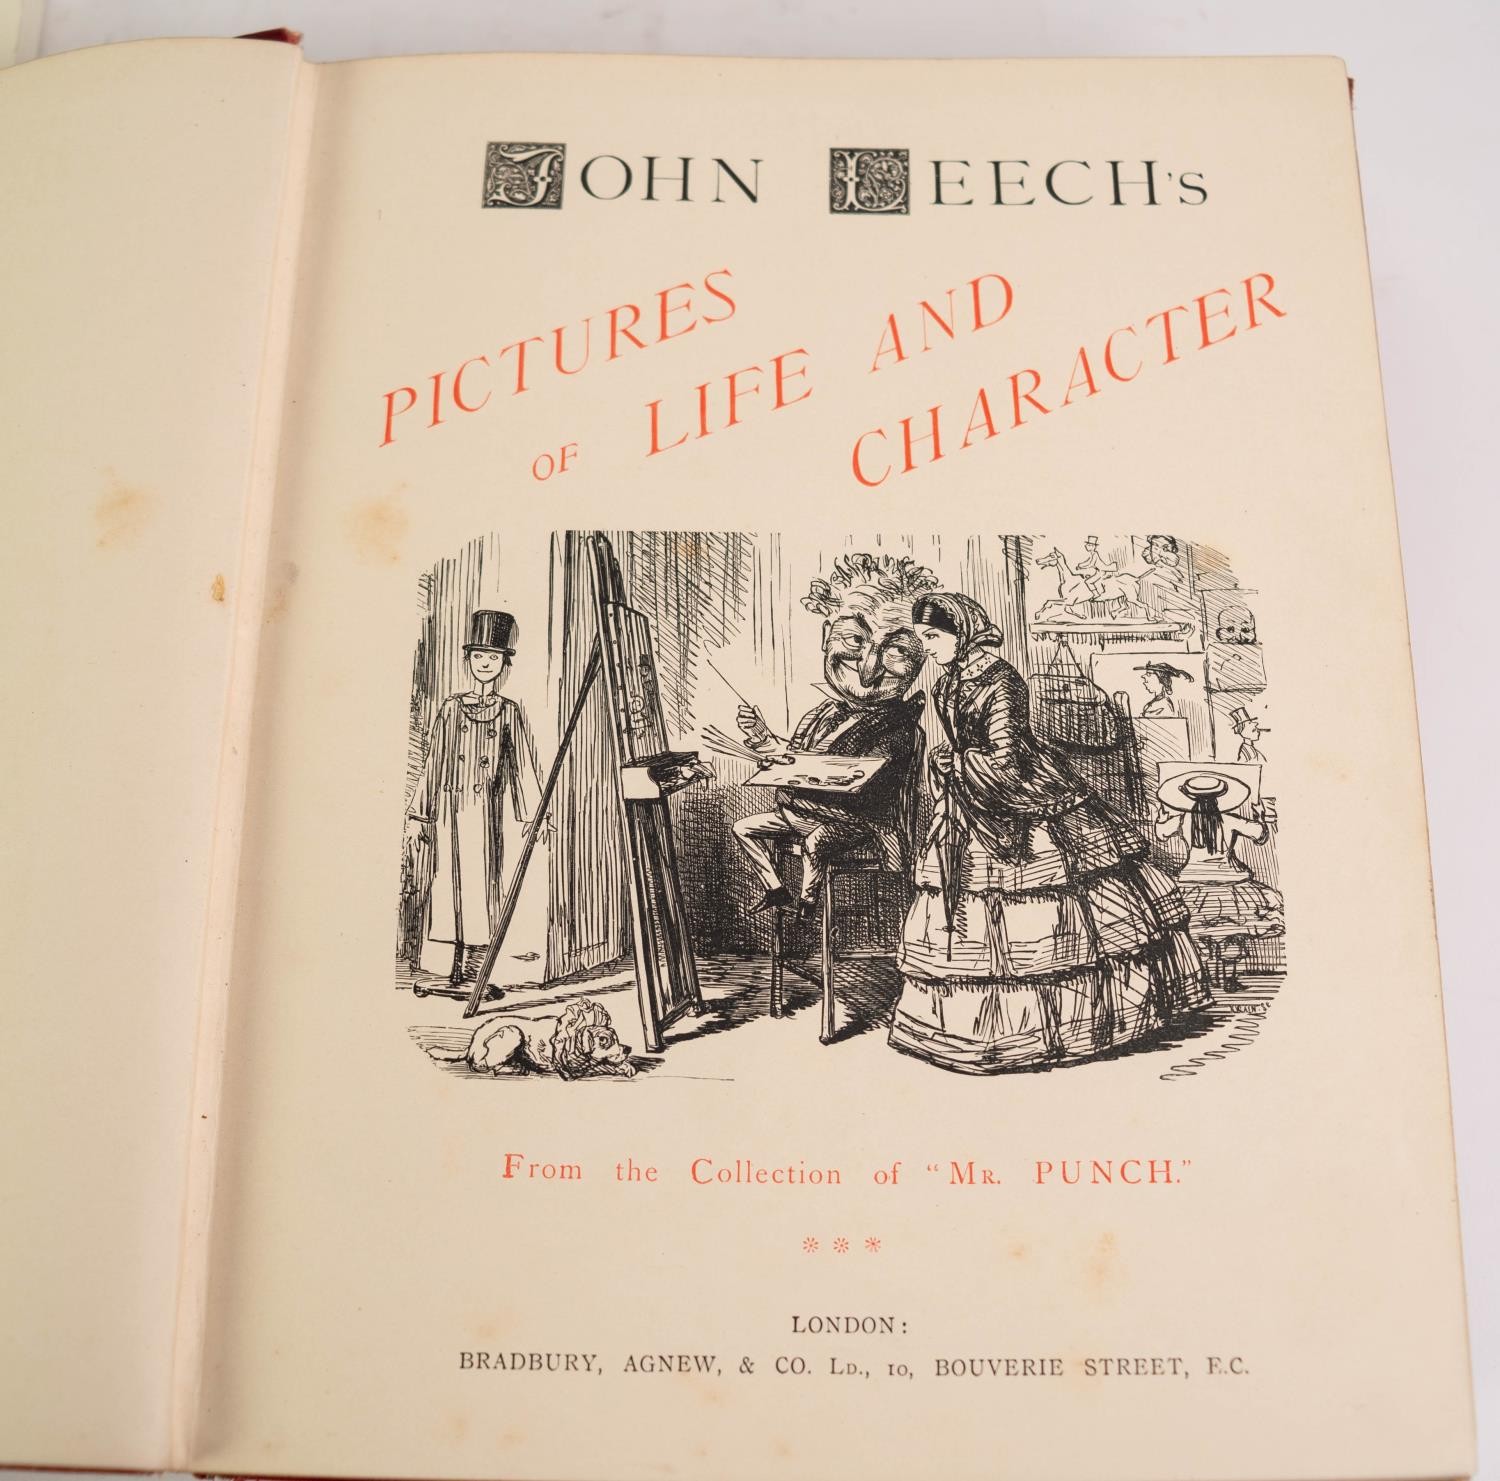 JOHN LEECH?S Pictures of Life and Character from the Collections of MR PUNCH, 3 vol set, pub - Image 4 of 4